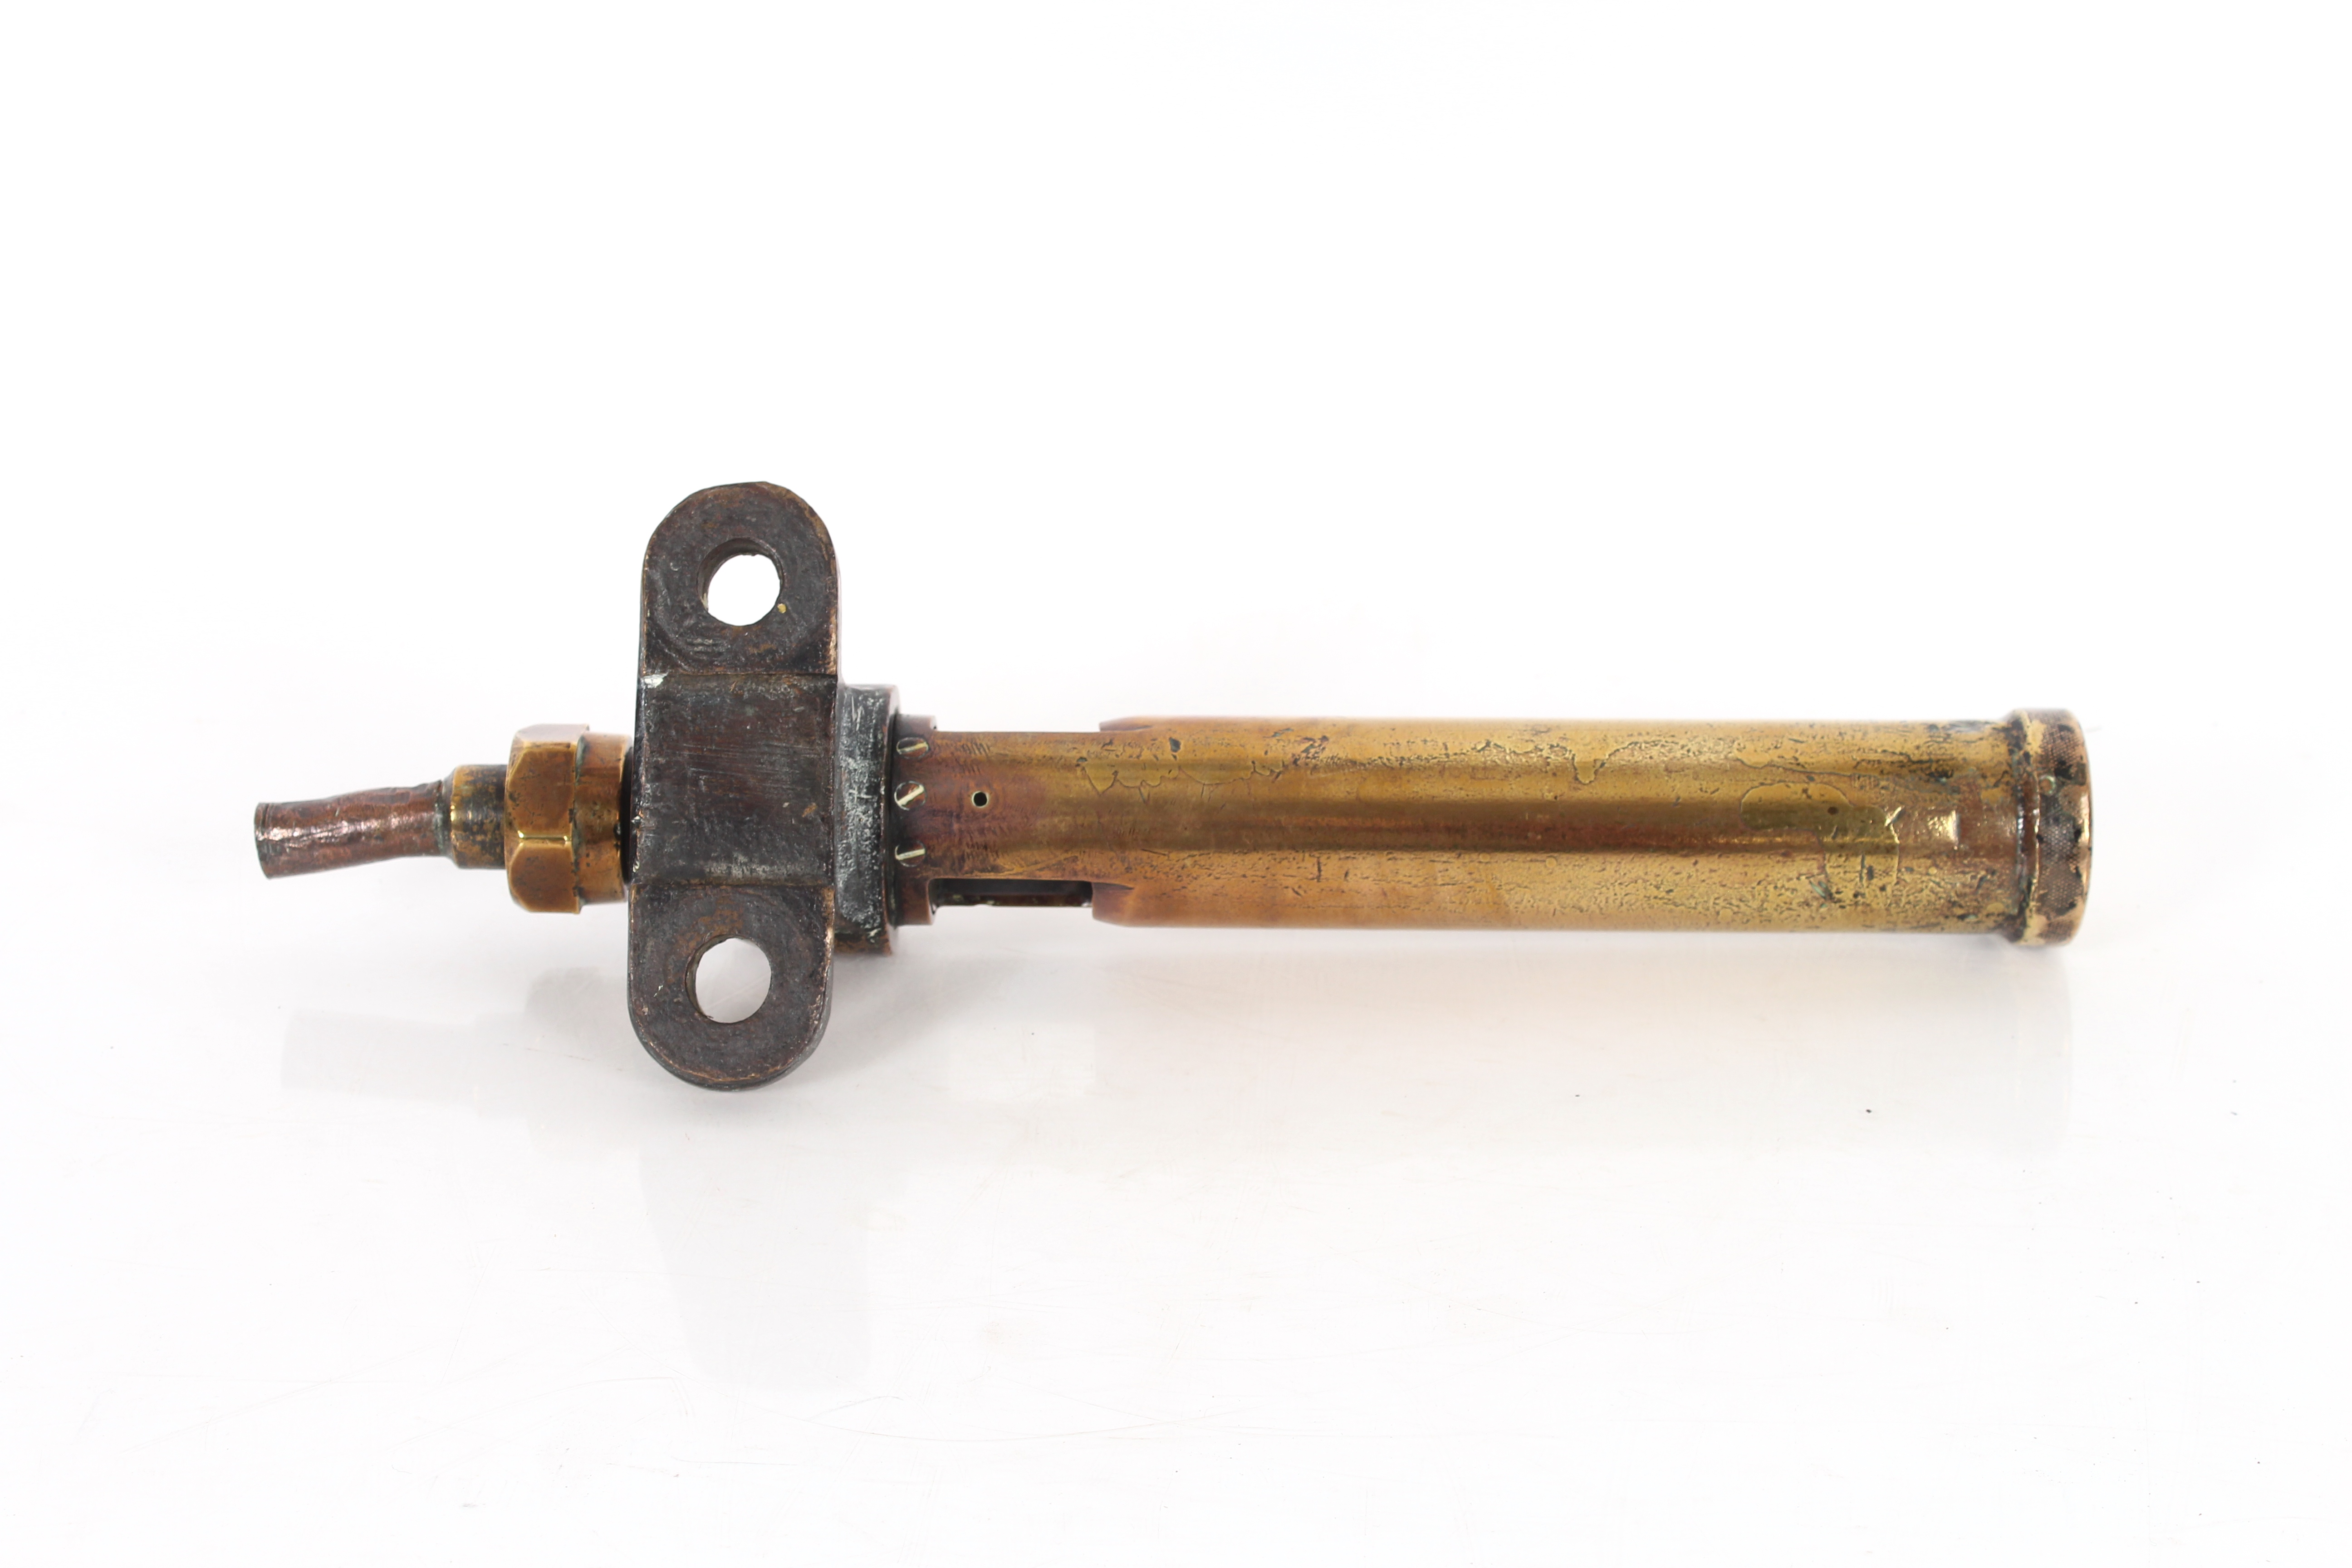 A brass and bronze LMS steam train whistle, 49cm - Image 3 of 3